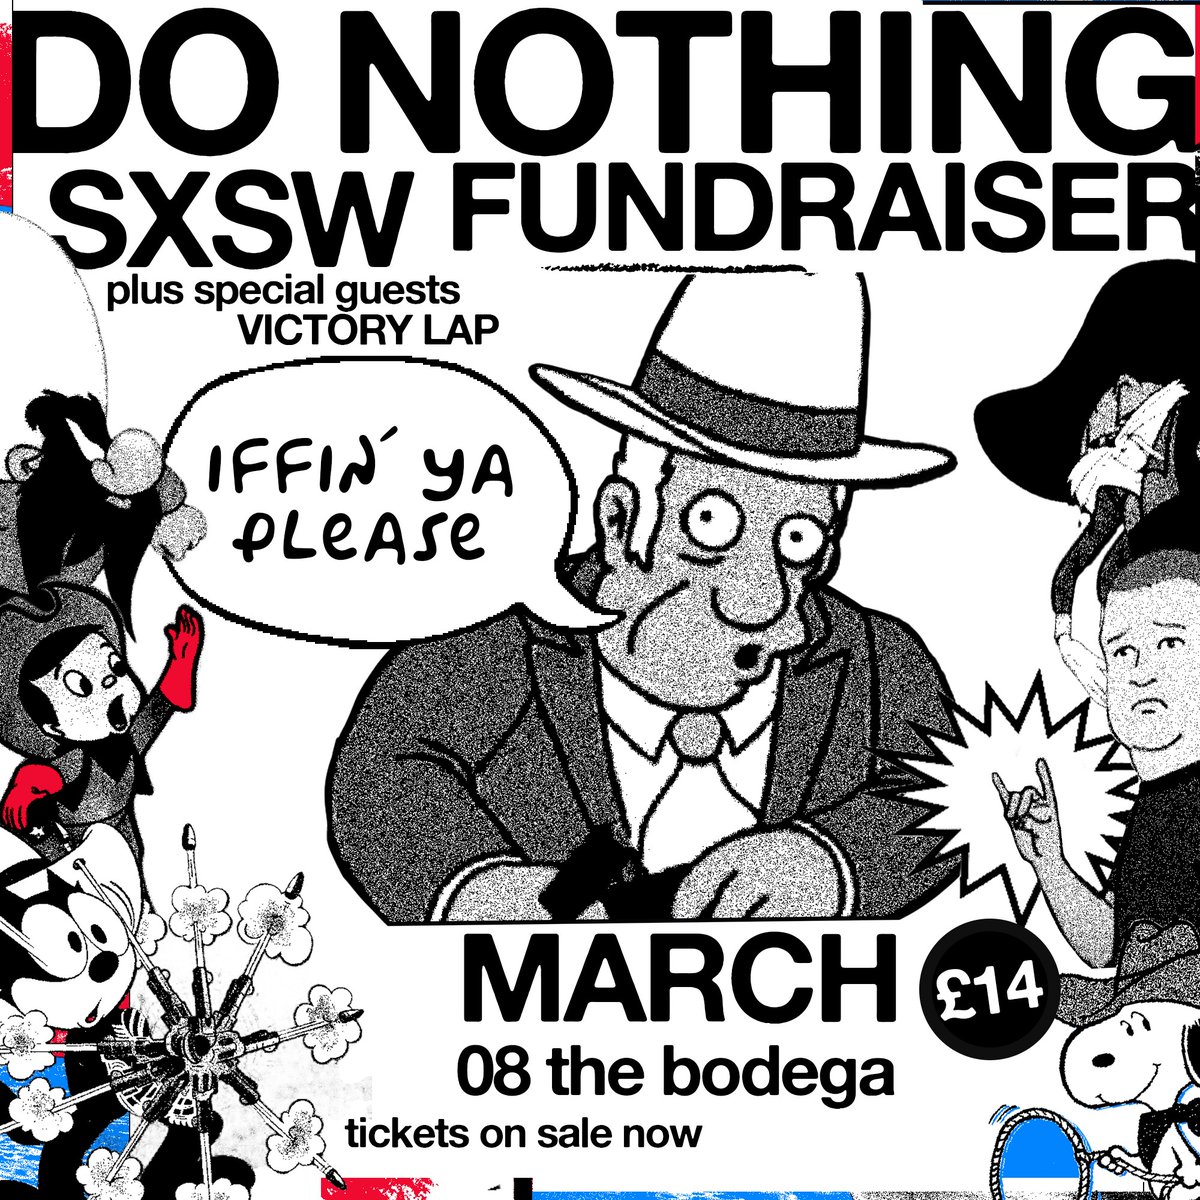 GIG NEWS From Notts to Texas. Our good mates @donothingband are putting on a special SXSW fundraiser gig at our place on 8th March, joined by special guests @victorylapmusic. Tickets are on sale now from alt.tkts.me/tl/2fjm...